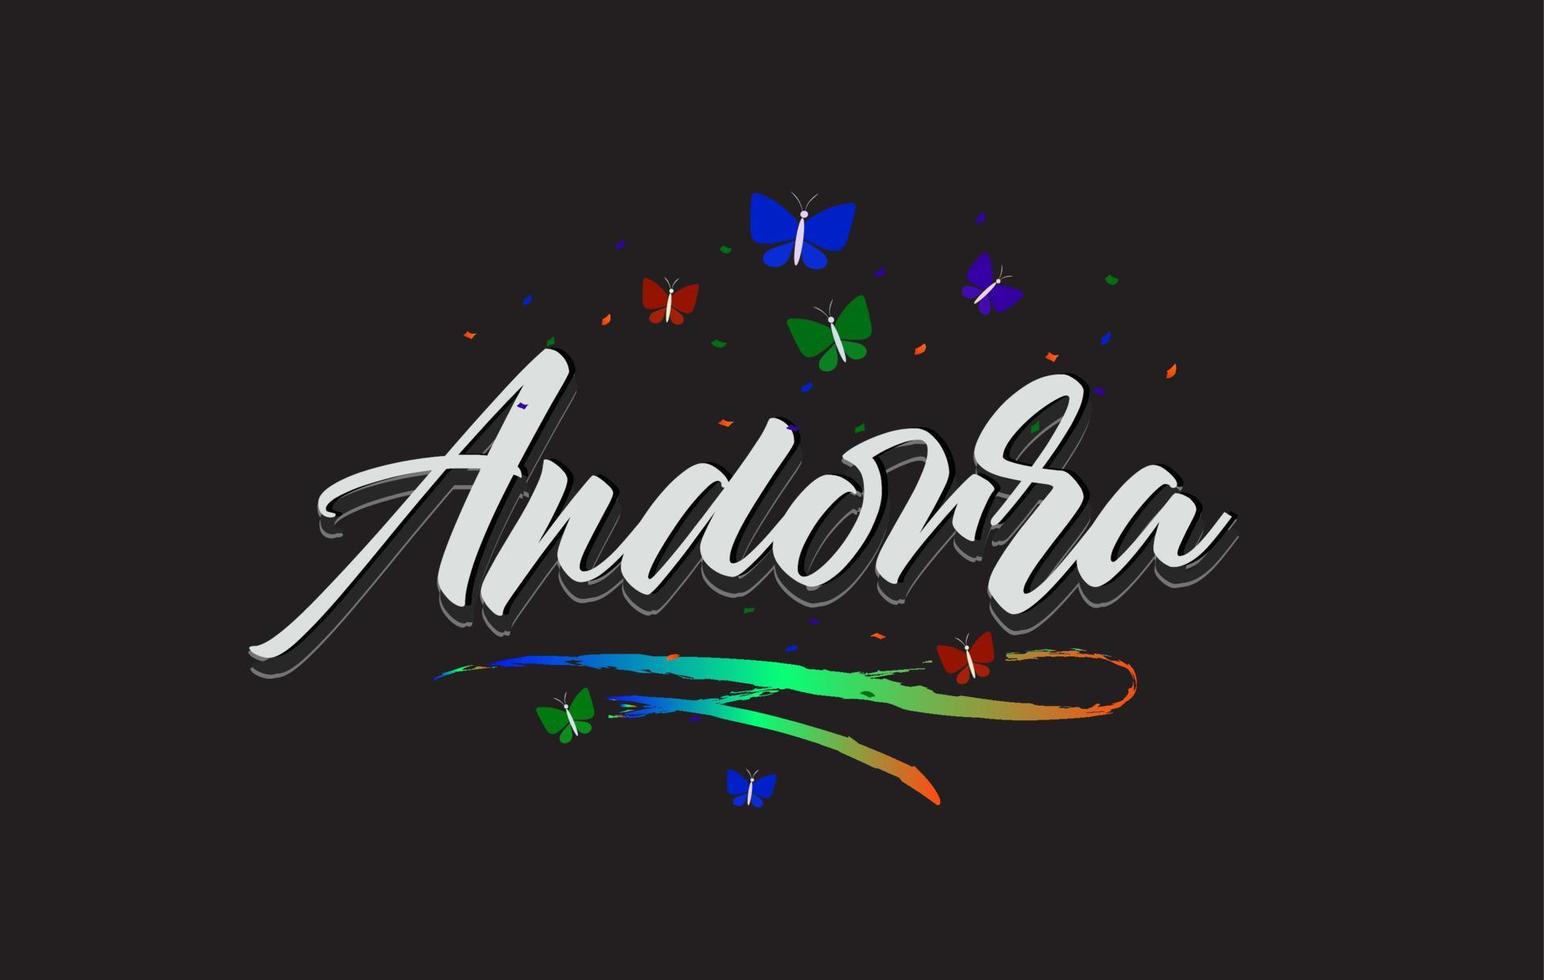 White Andorra Handwritten Vector Word Text with Butterflies and Colorful Swoosh.